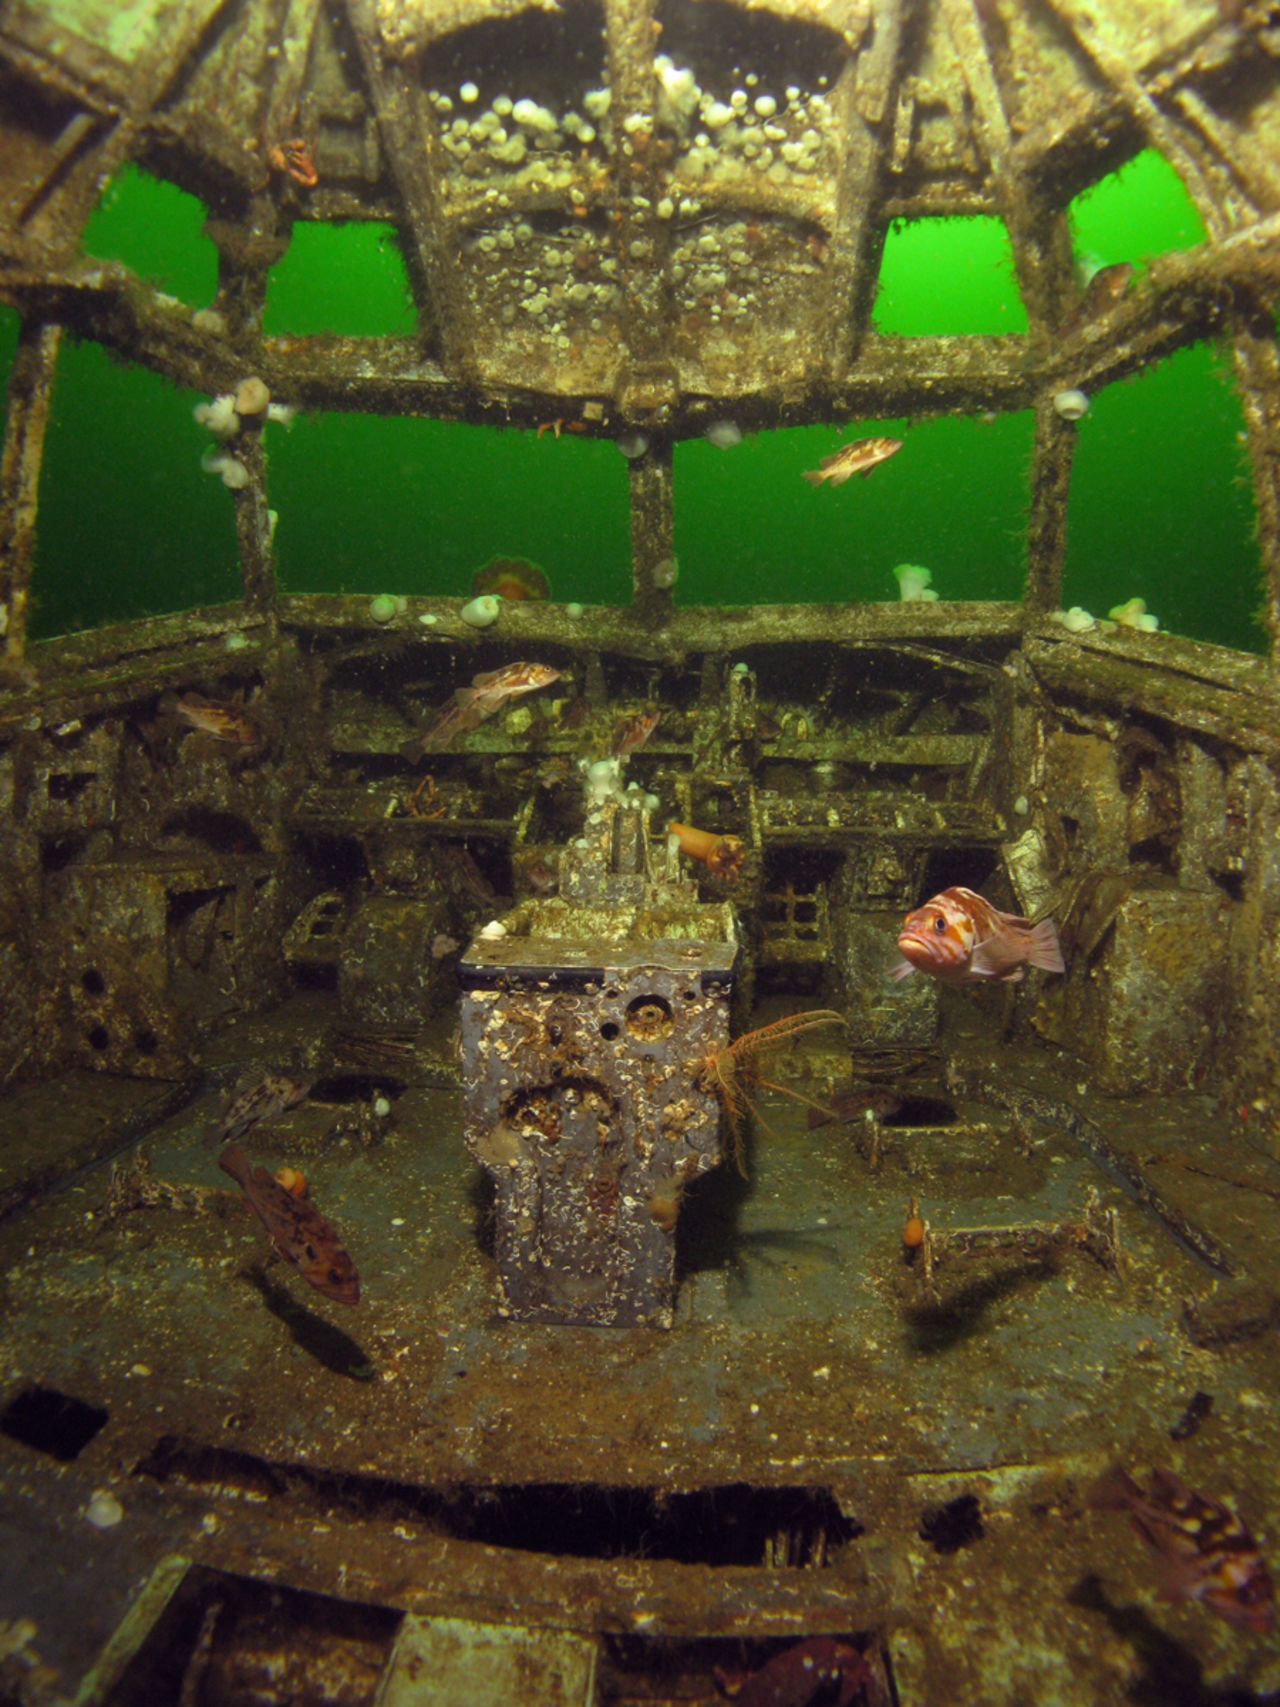 Once a Boeing 737, this artificial reef off the coast of British Columbia is so covered in algae that it's hard to believe that it was once airborne. "It sits in about 90 feet of water suspended on an underwater 'cradle,' to simulate 'flying' underwater," says Deidre Forbes McCracken of the Artificial Reef Society of British Columbia. "The reef attracts divers from all around the world."